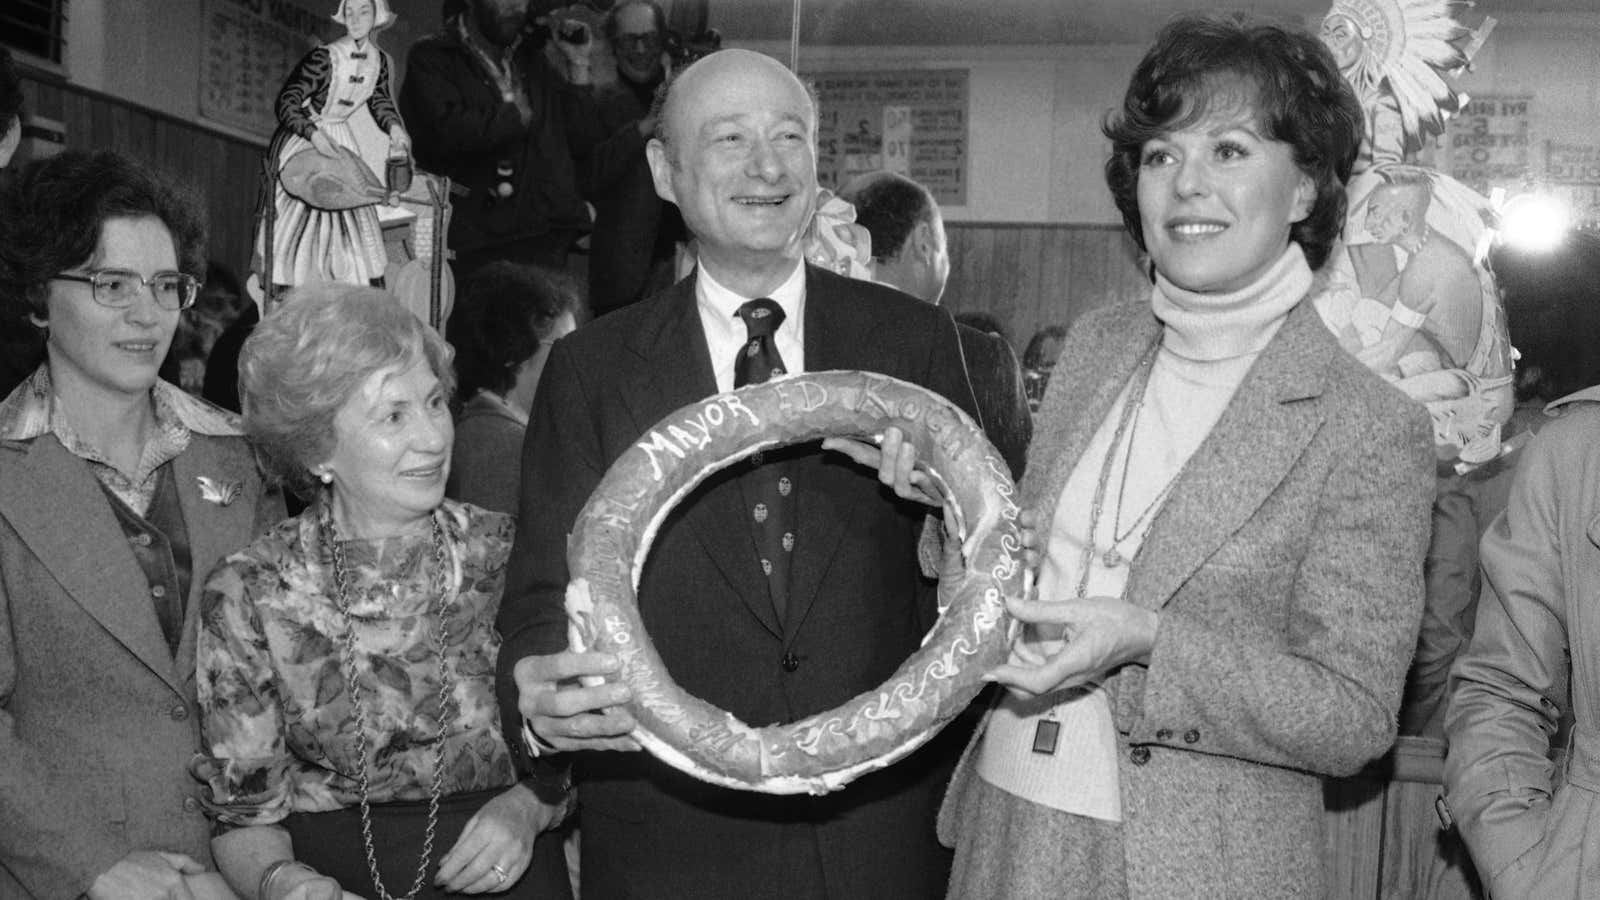 Then mayor-elect Edward Koch and Miss America Bess Myerson pose with New York’s real icon: The bagel.